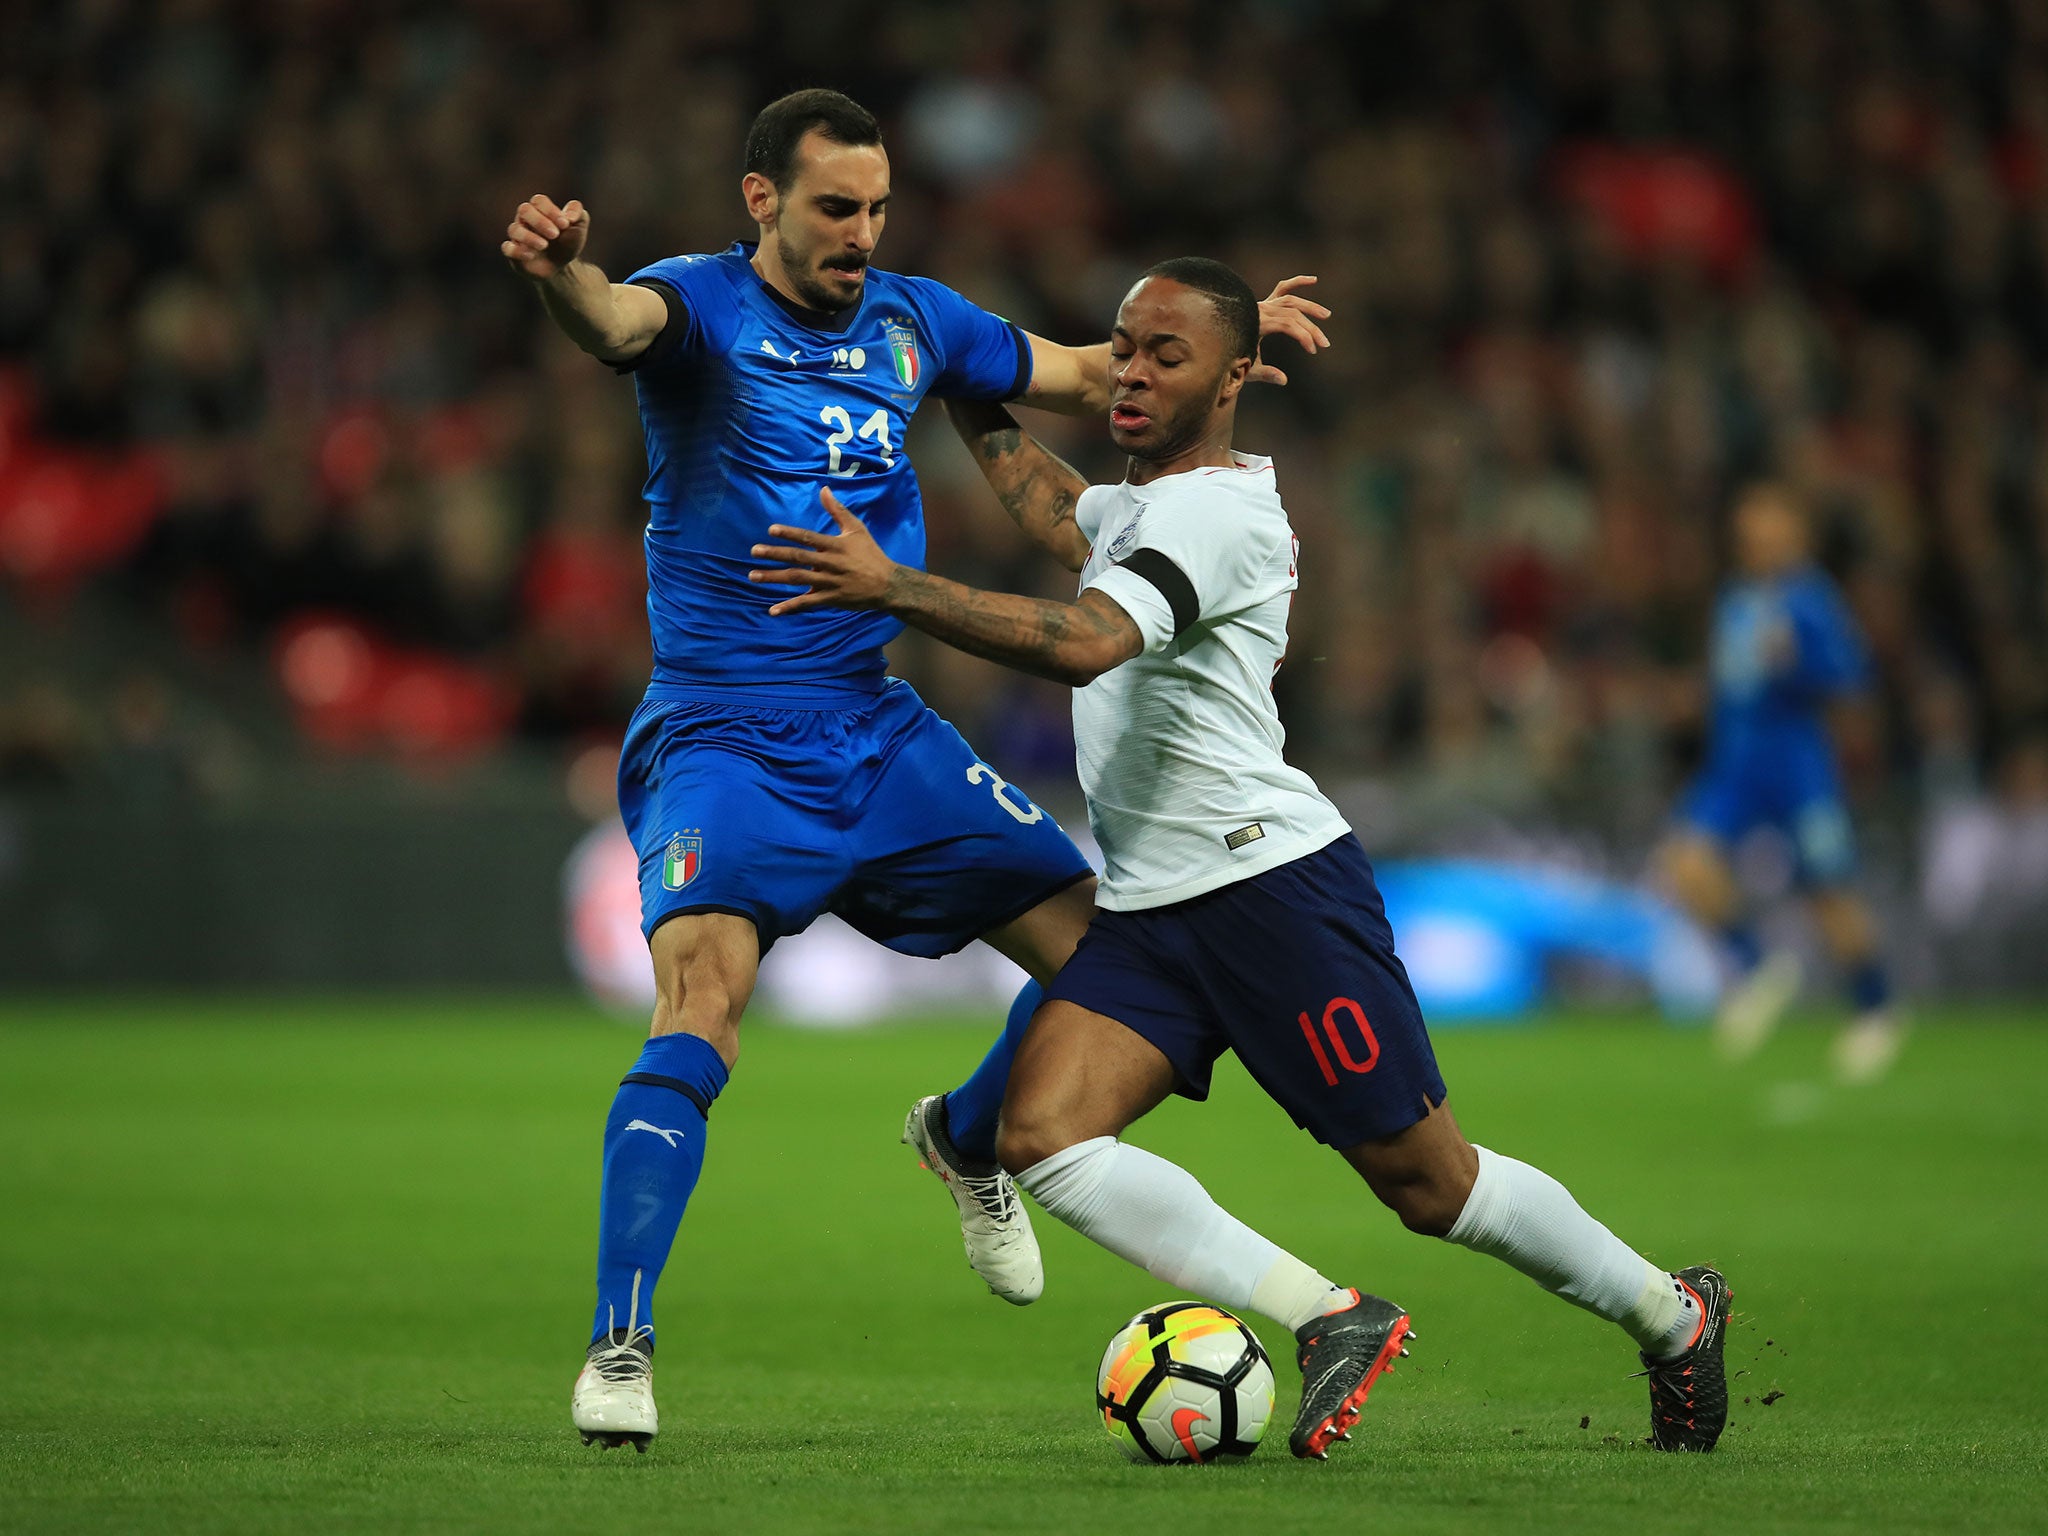 Raheem Sterling tussles for possession with Davide Zappacosta